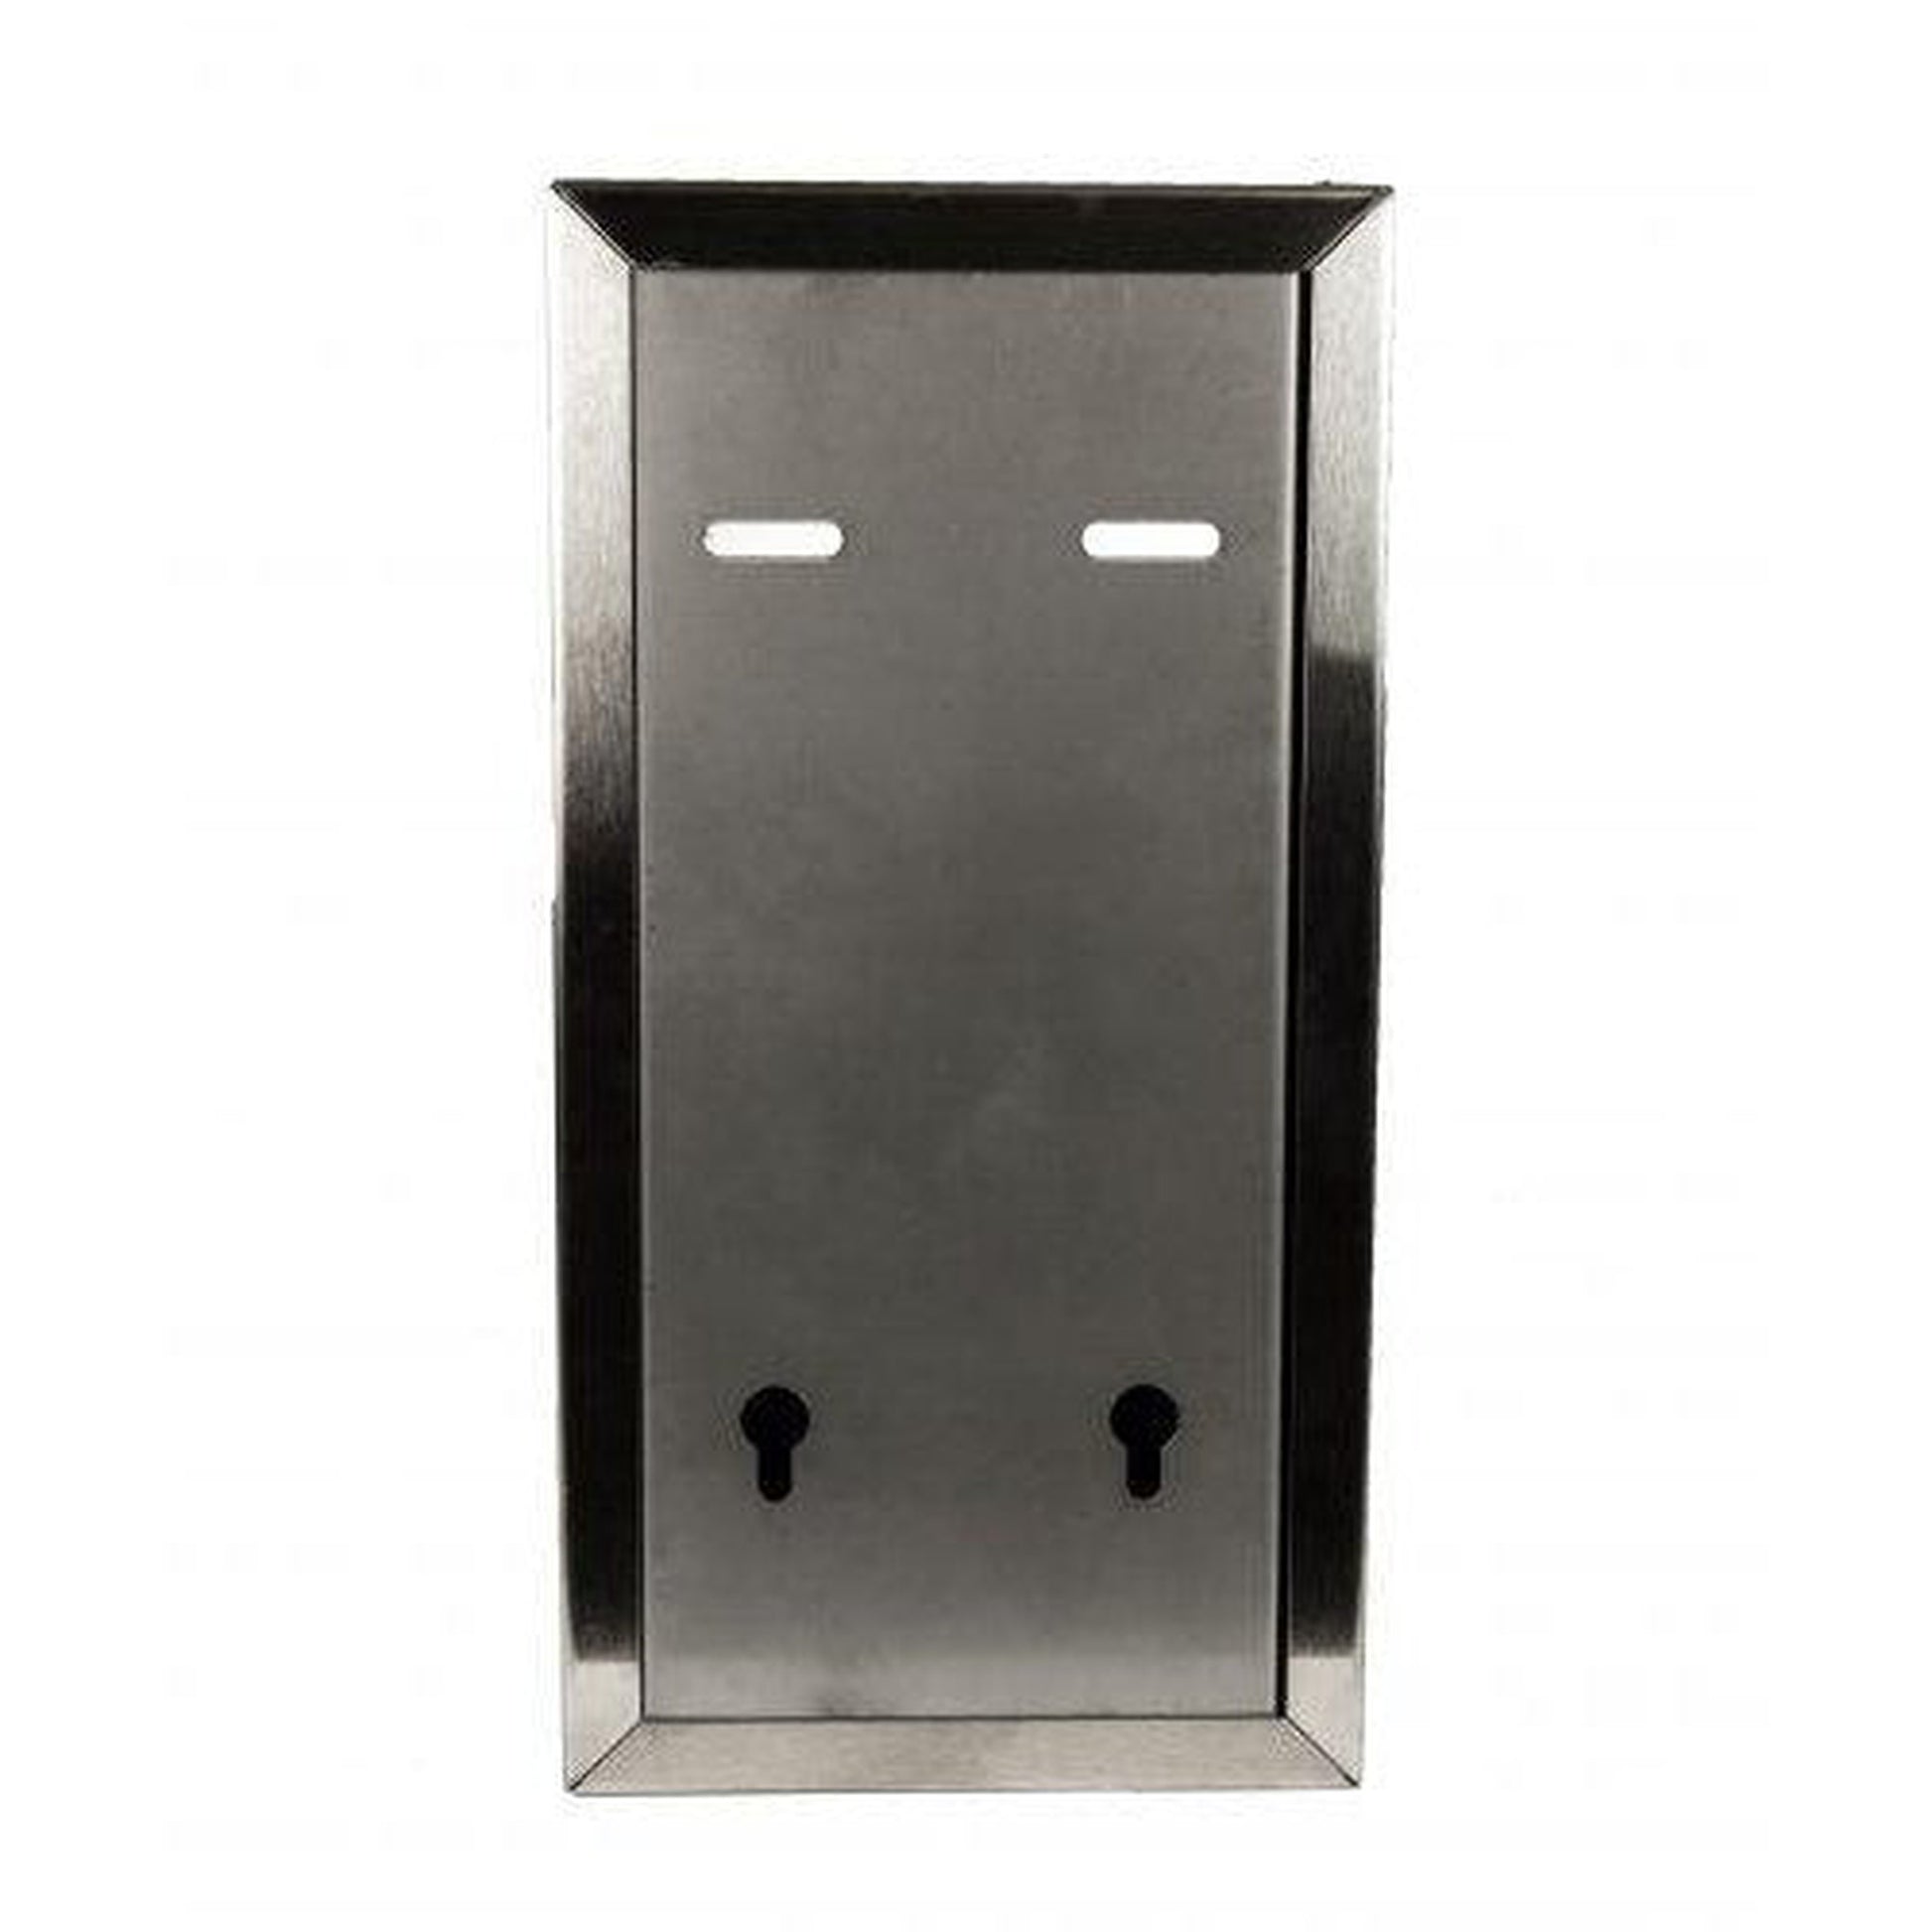 Frost 6 x 12 x 6 Stainless Steel Satin Paper Product Dispenser